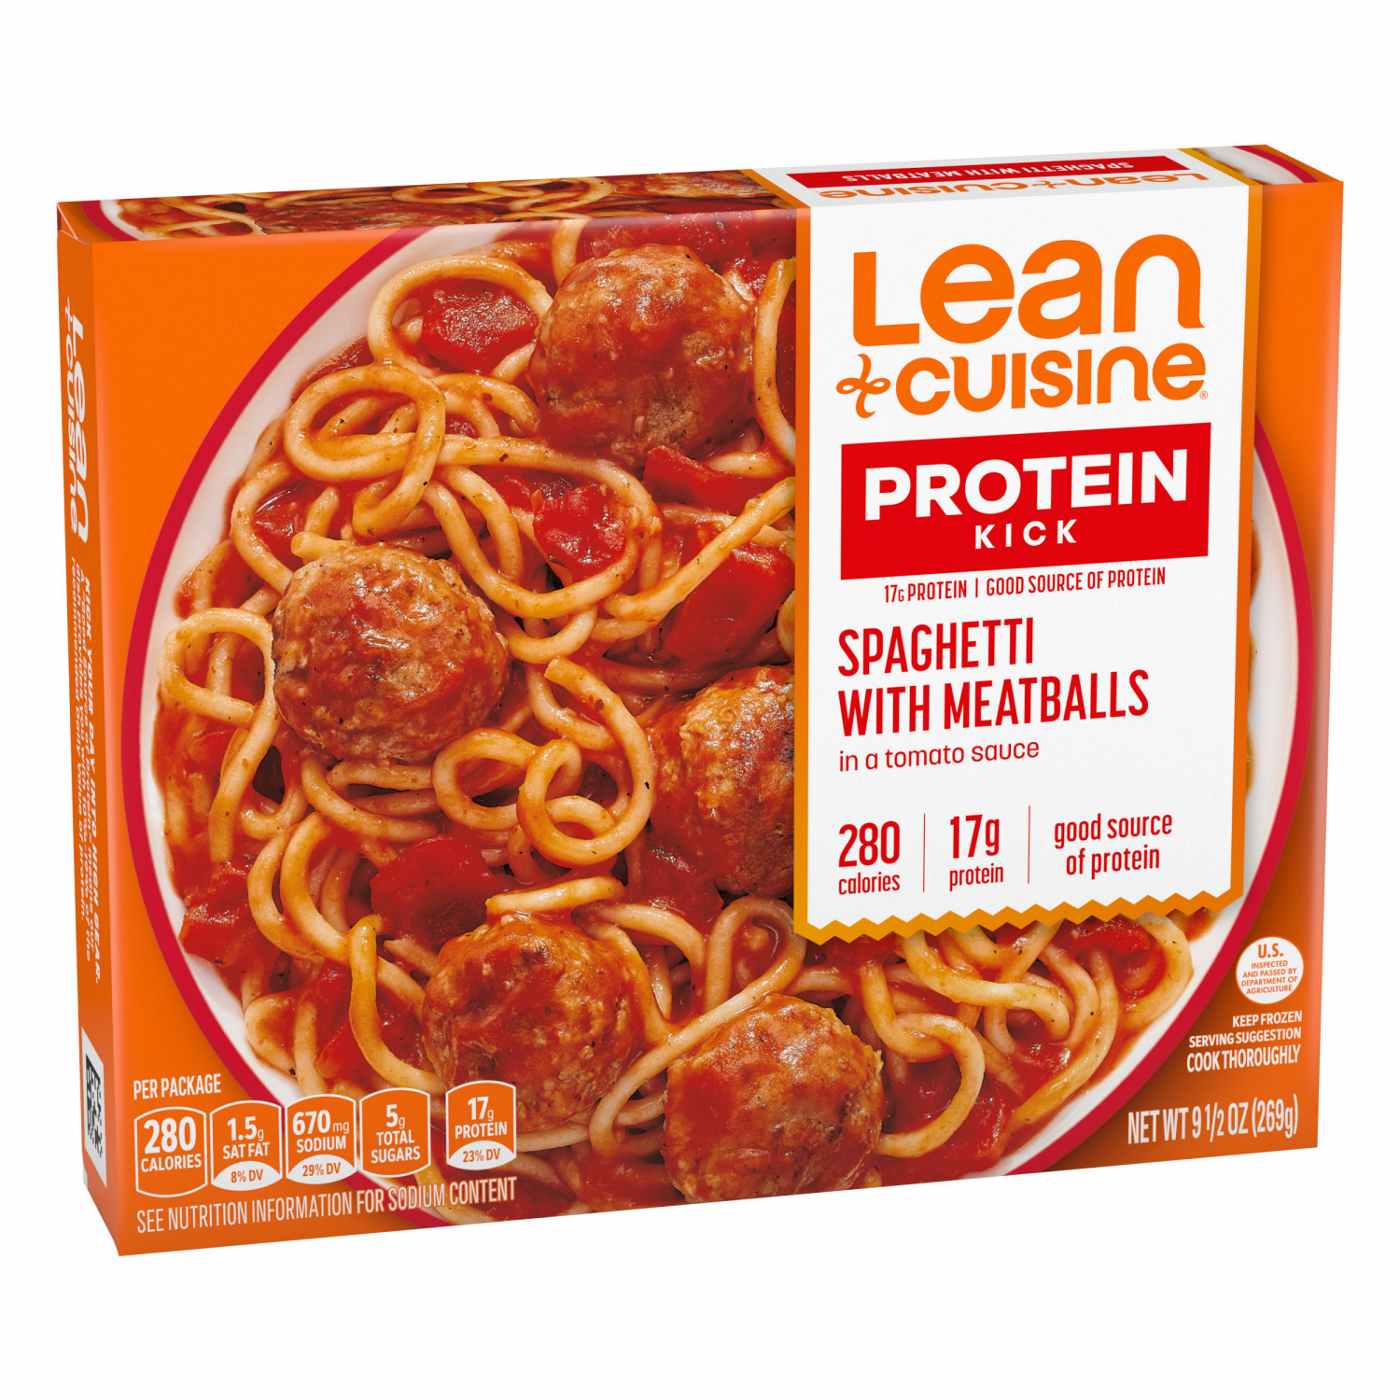 Lean Cuisine 17g Protein Spaghetti & Meatballs Frozen Meal; image 7 of 7